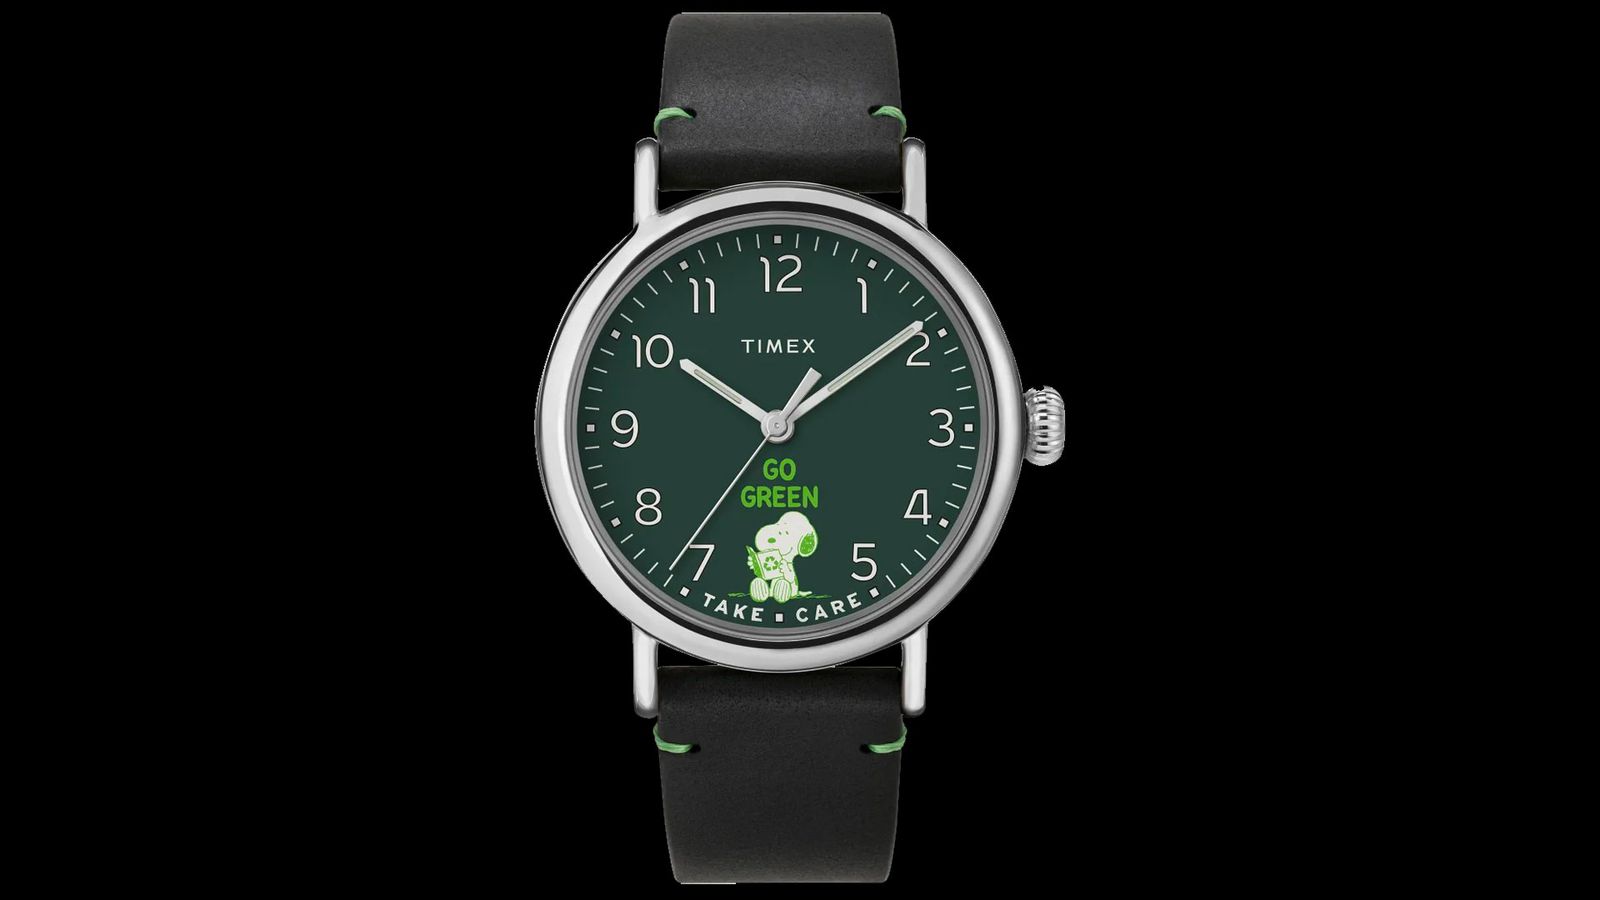 Timex Standard x Peanuts Take Care product image of a silver watch with a black strap with a green Snoopy graphic on the face.